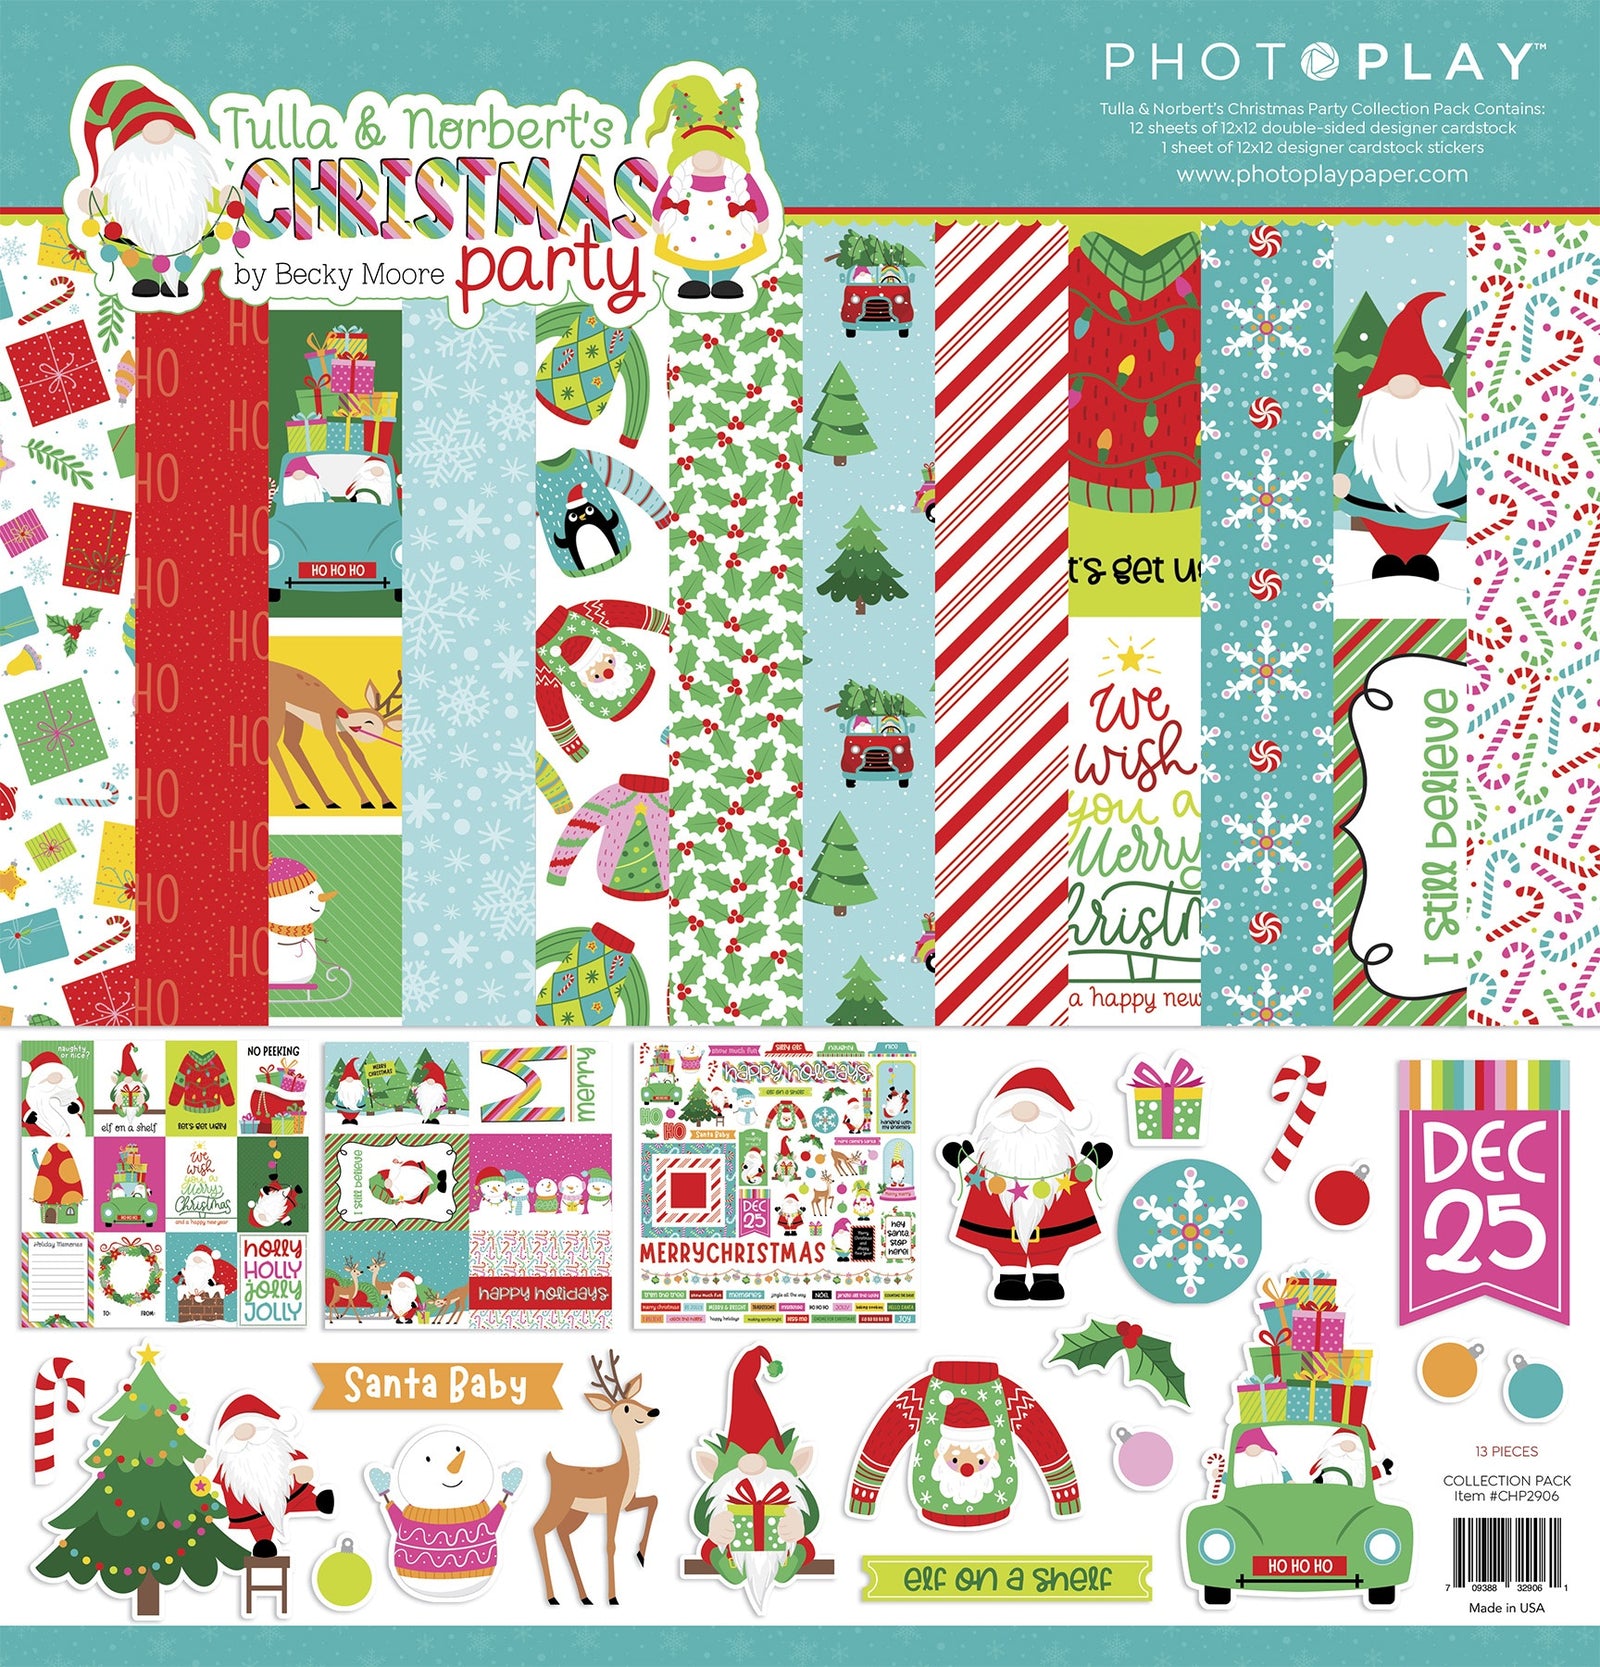 Tulla & Norbert's Christmas Party - 12 x 12 Inch - PhotoPlay Collection Pack